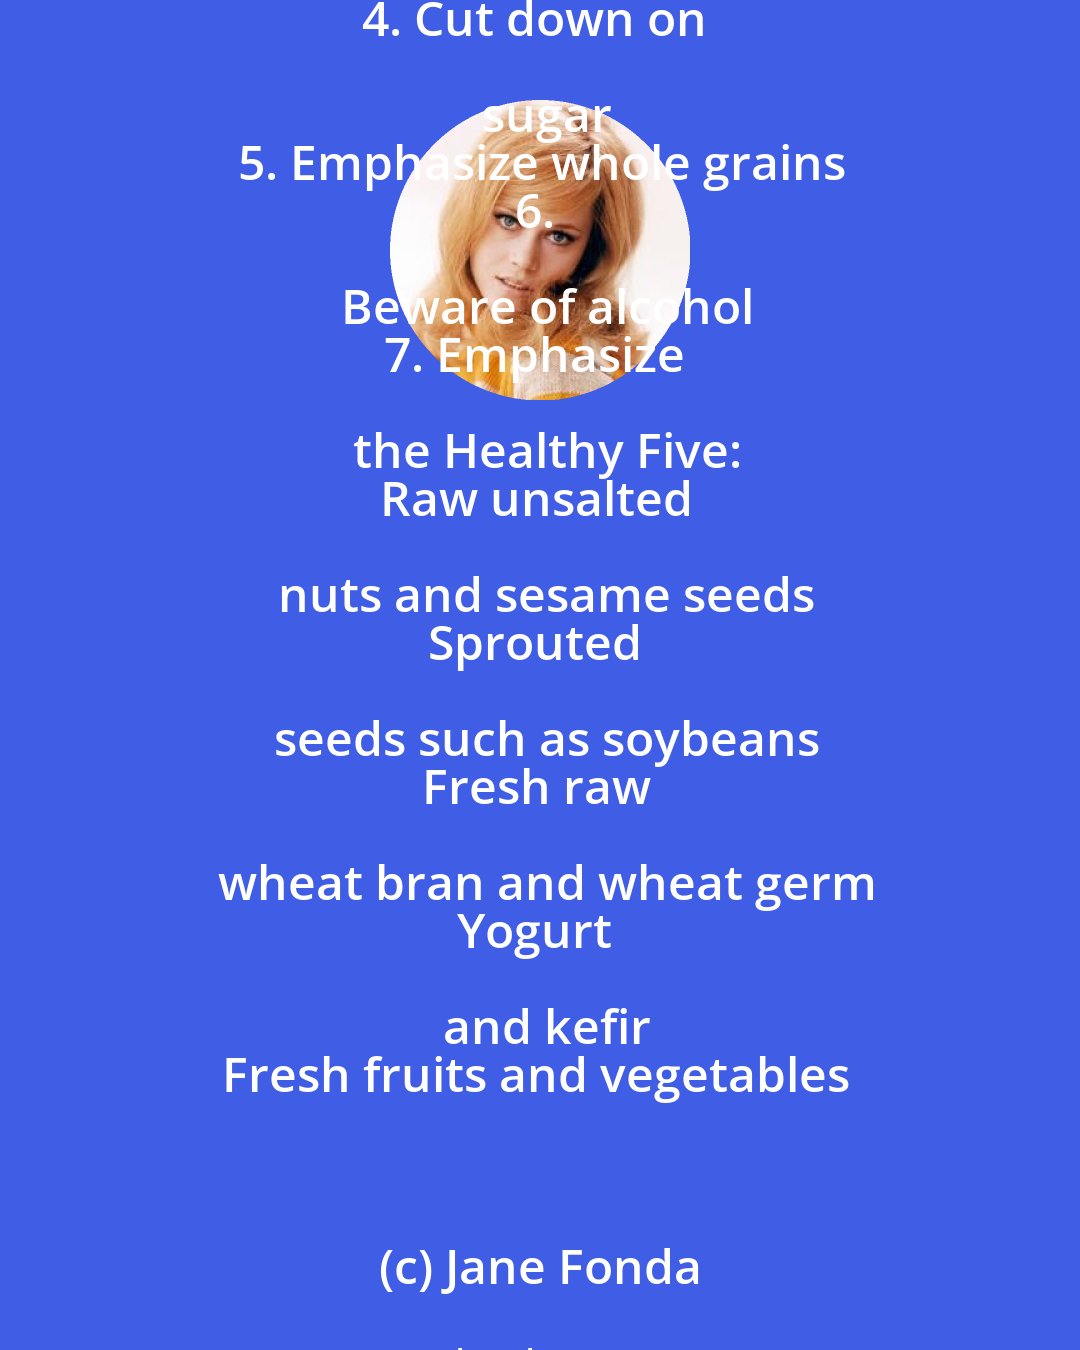 Jane Fonda: Seven Guidelines For a Healthy Diet
1. Substitute low-fat foods for high-fat foods
2. Cut down on meat-eat low on the food chain
3. Avoid salty and sugary foods
4. Cut down on sugar
5. Emphasize whole grains
6. Beware of alcohol
7. Emphasize the Healthy Five:
Raw unsalted nuts and sesame seeds
Sprouted seeds such as soybeans
Fresh raw wheat bran and wheat germ
Yogurt and kefir
Fresh fruits and vegetables